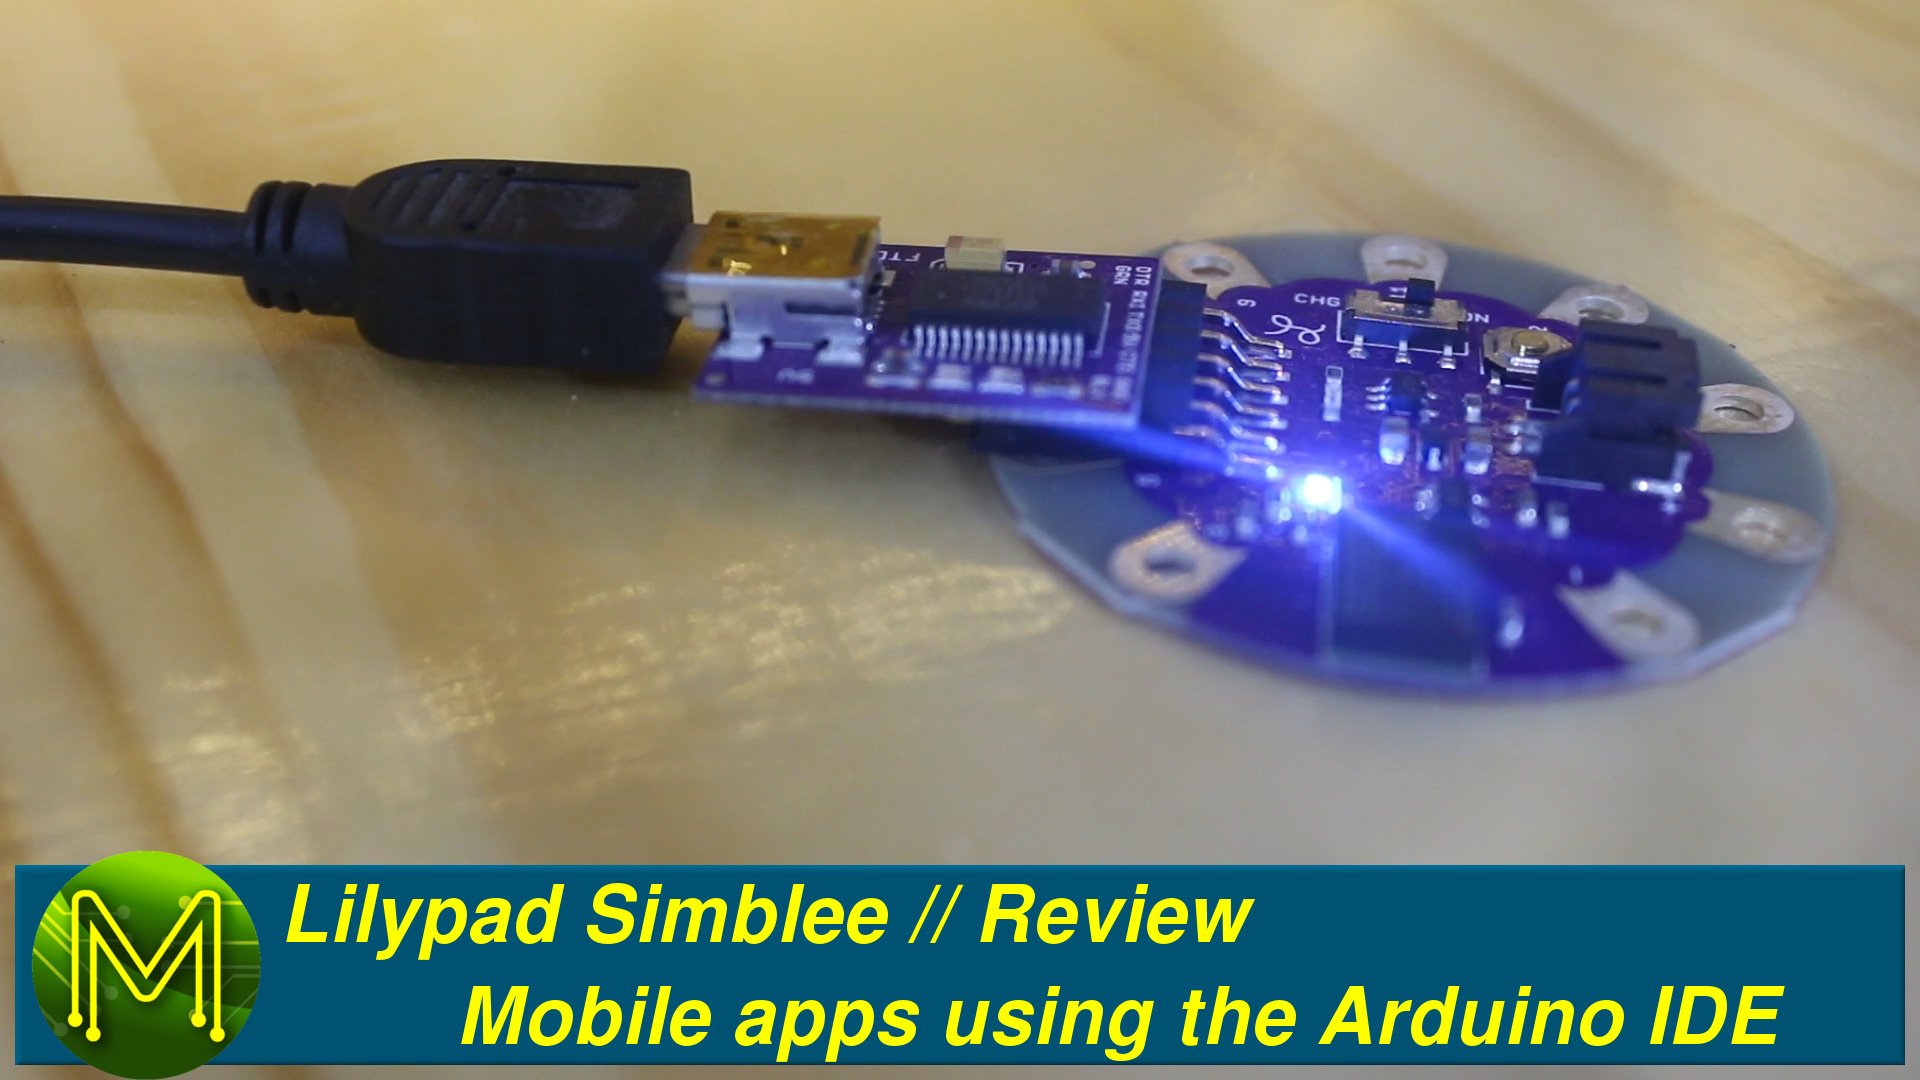 Lilypad Simblee: Mobile apps using the Arduino IDE // Review